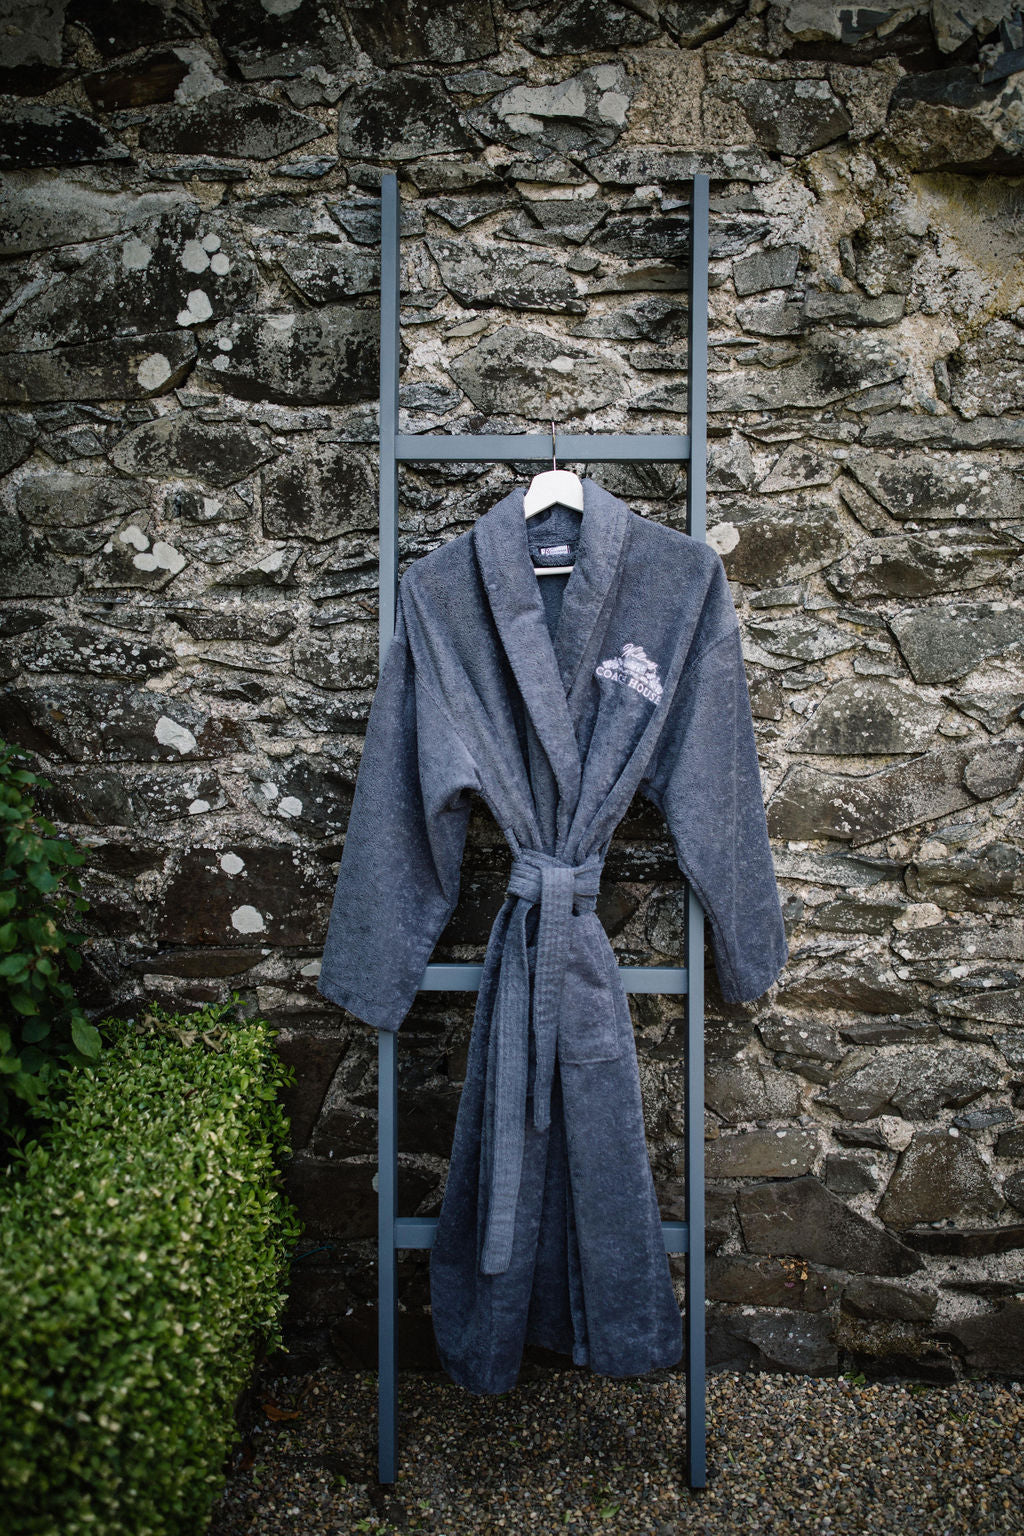 Limited Edition Bath Robe by The Coach House